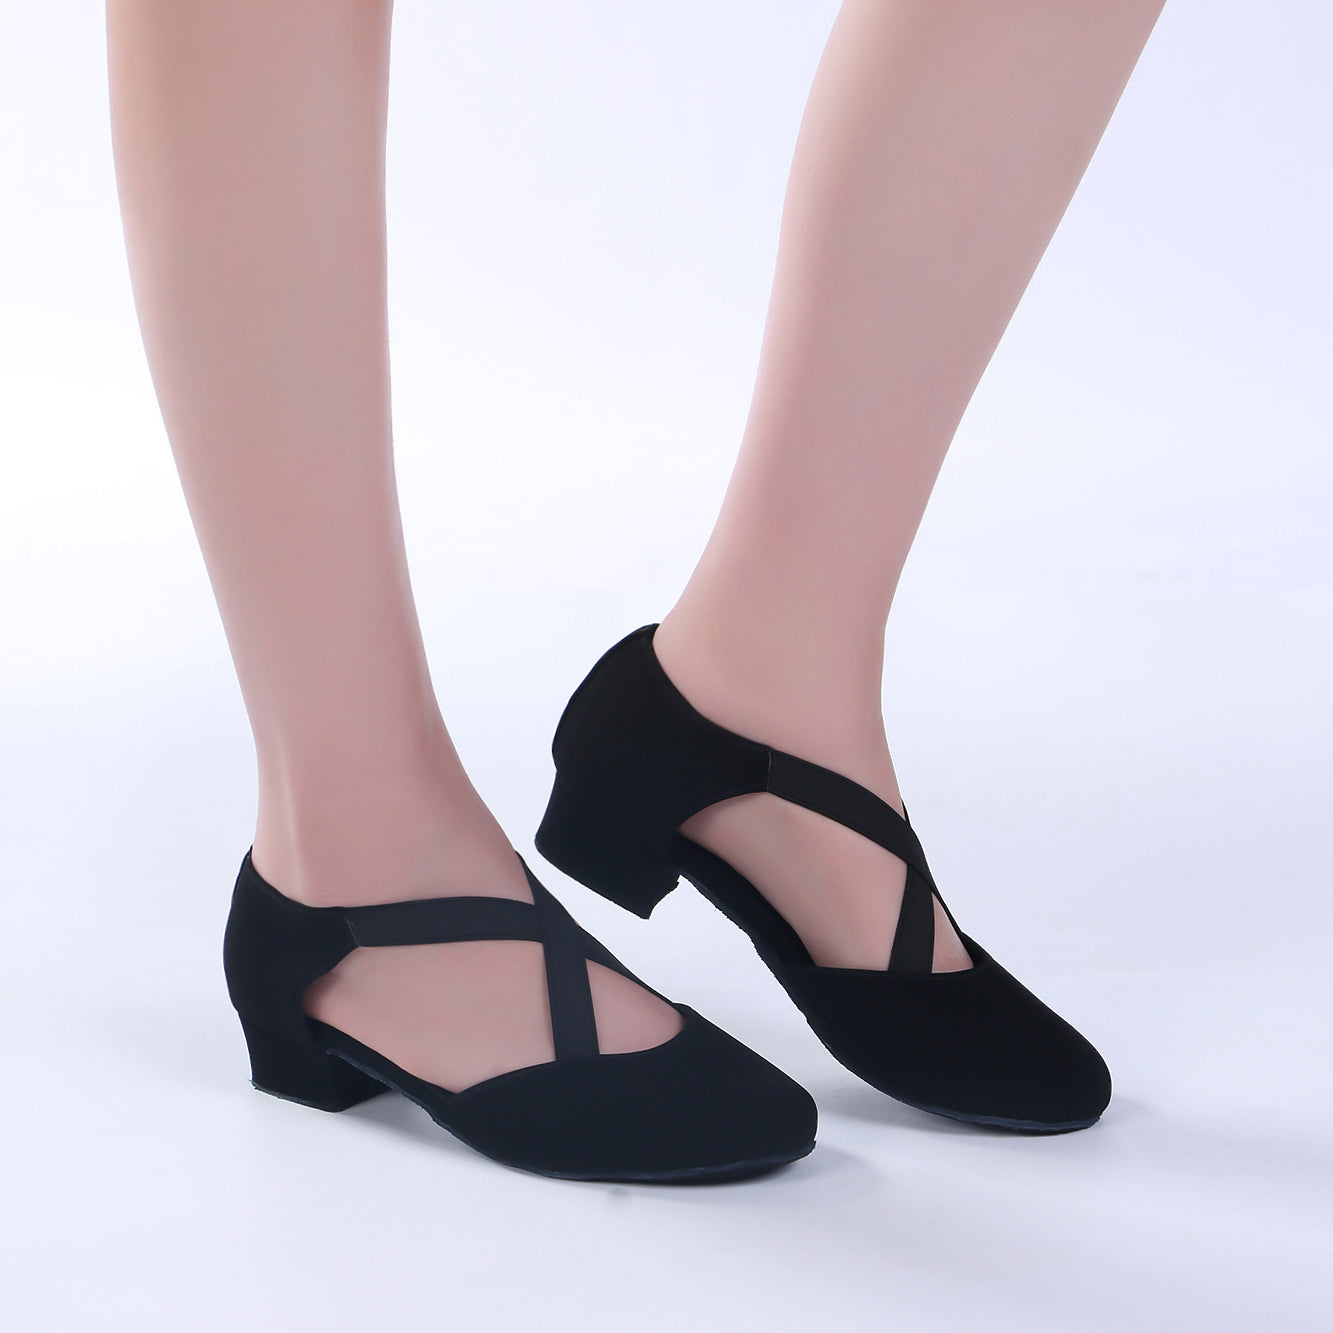 Ladies black low heel ballroom dancing shoes with suede sole for tango latin practice, closed-toe design (PD7307B)4